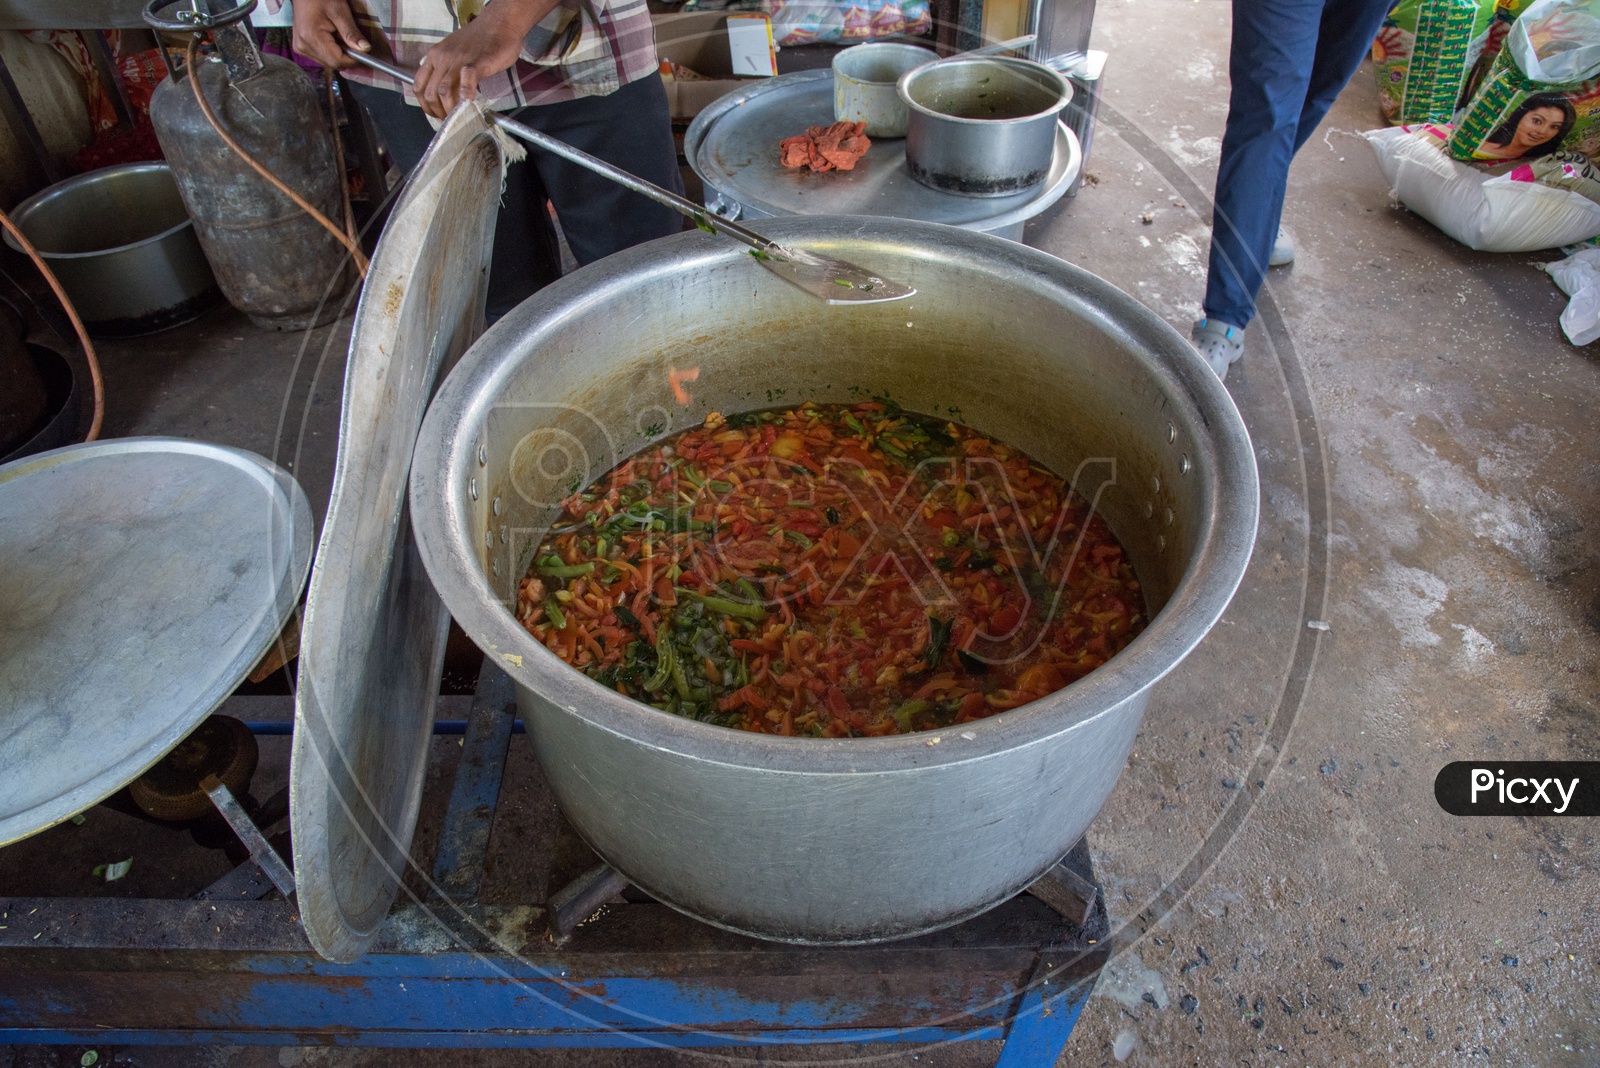 Boiling Tomato with other Ingredients.